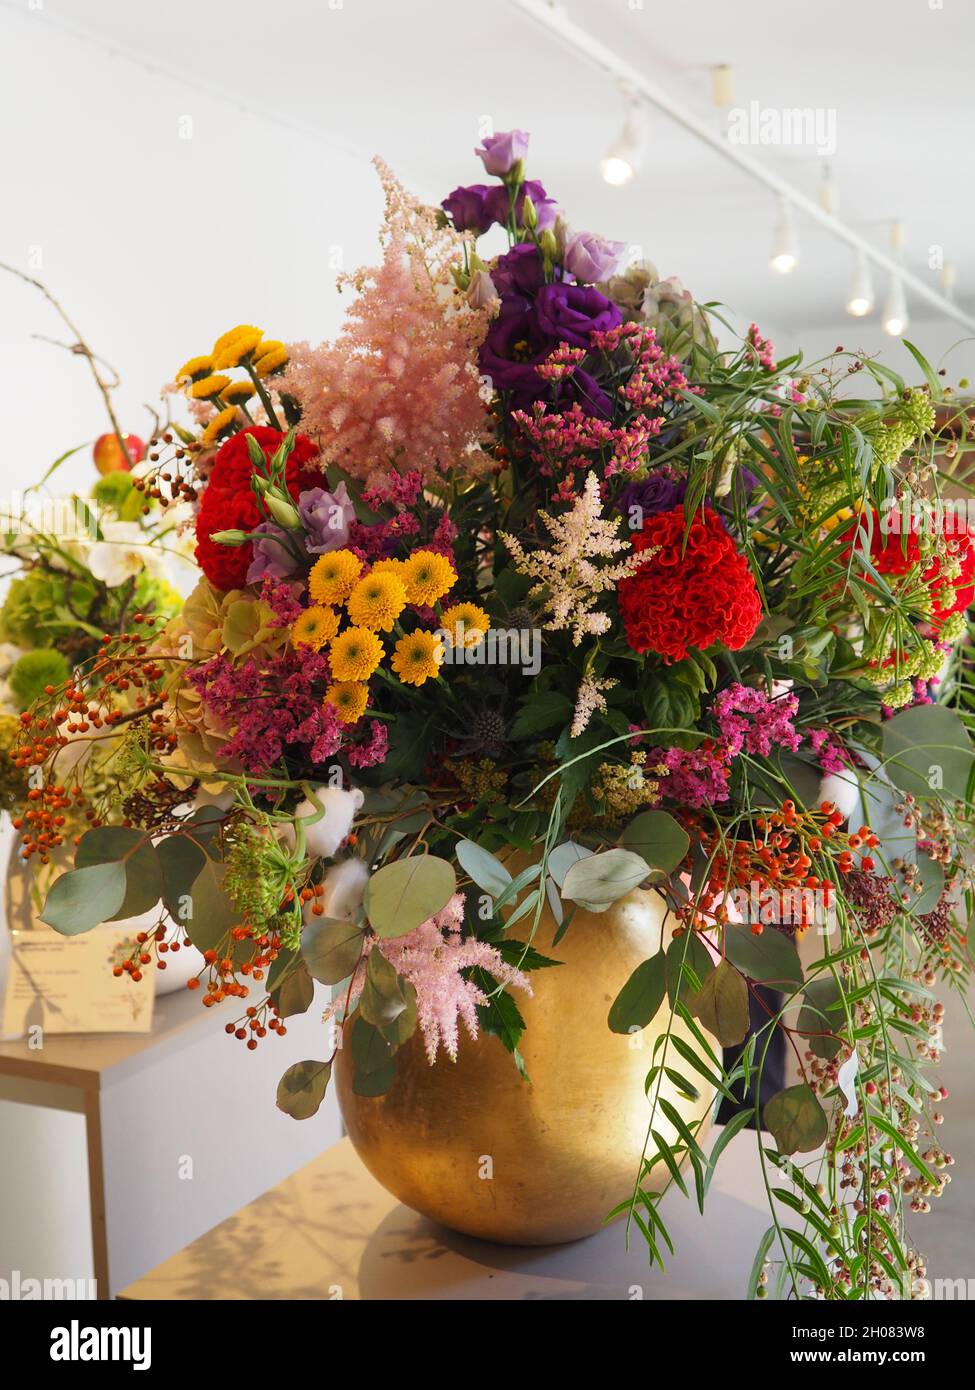 Closeup shot of various flowers in vases Stock Photo